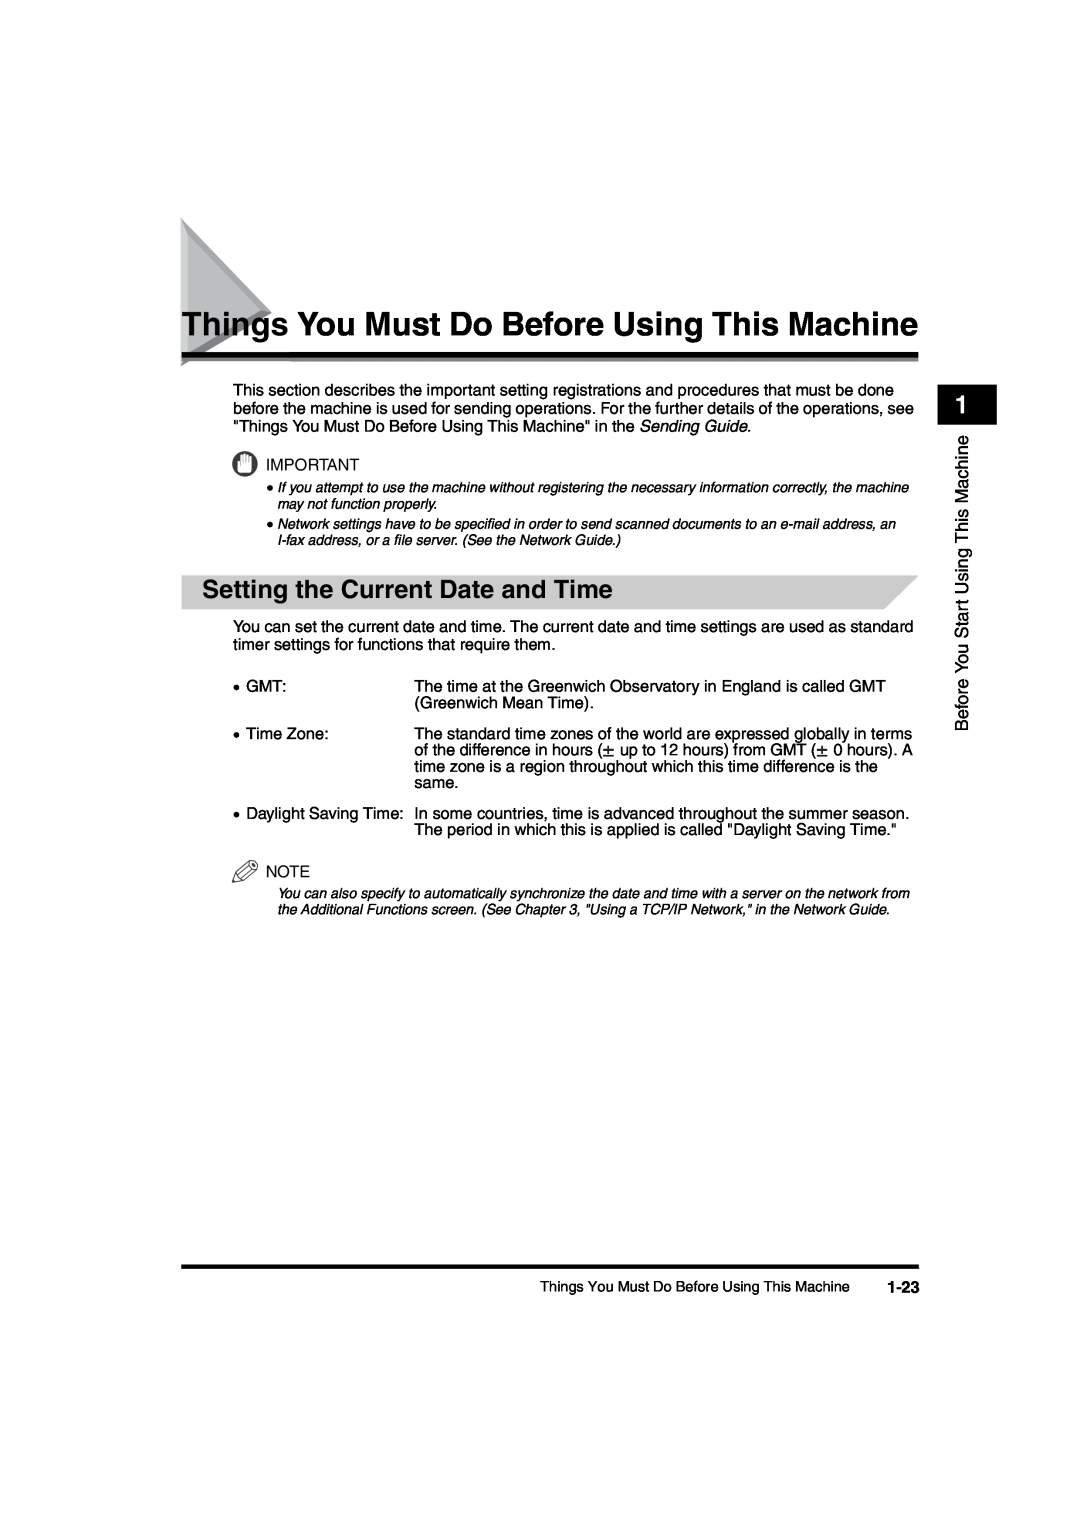 Canon iR6570 manual Things You Must Do Before Using This Machine, Setting the Current Date and Time, 1-23 